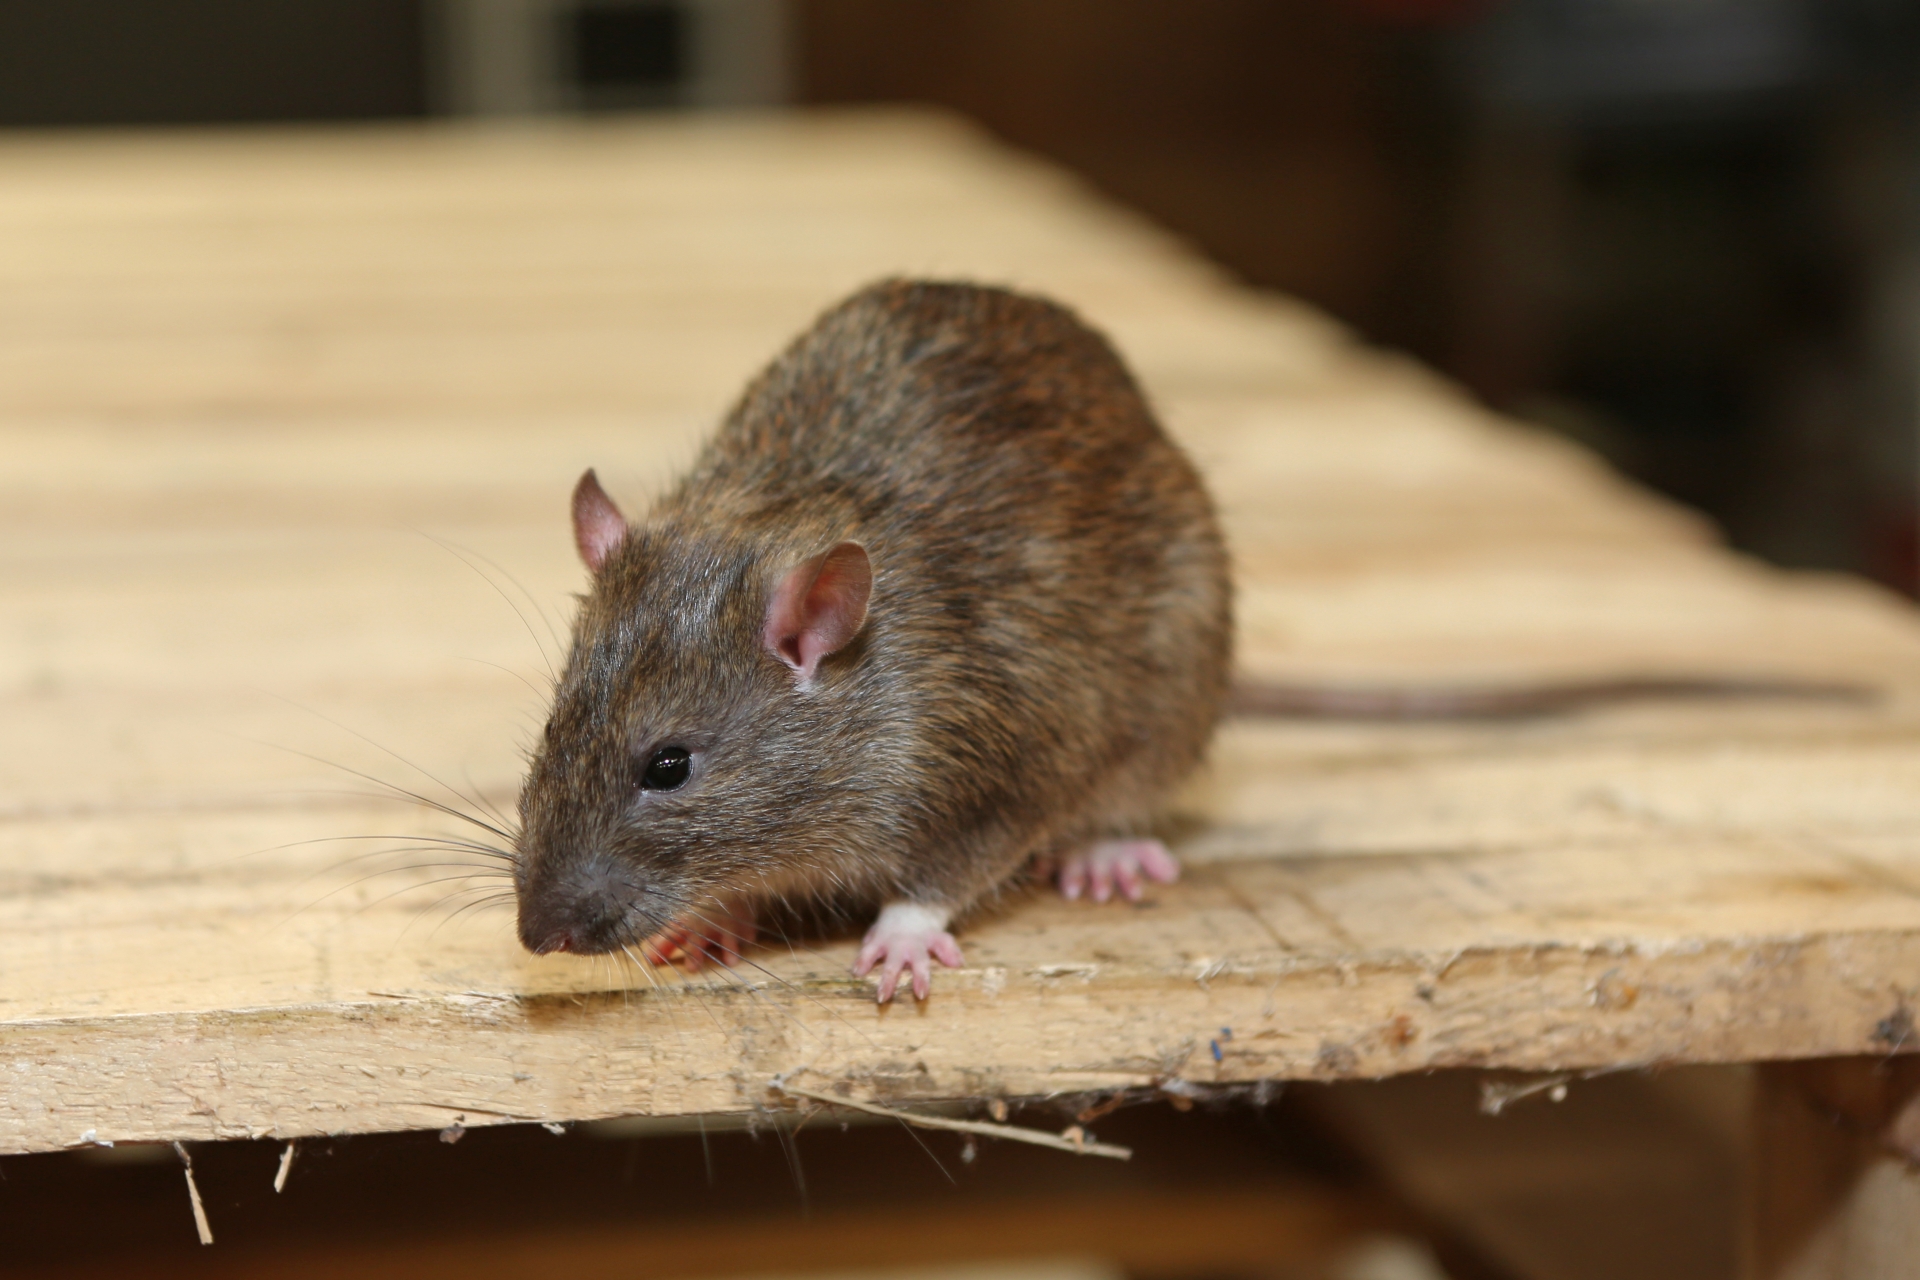 Rat extermination, Pest Control in Cricklewood, NW2. Call Now 020 8166 9746